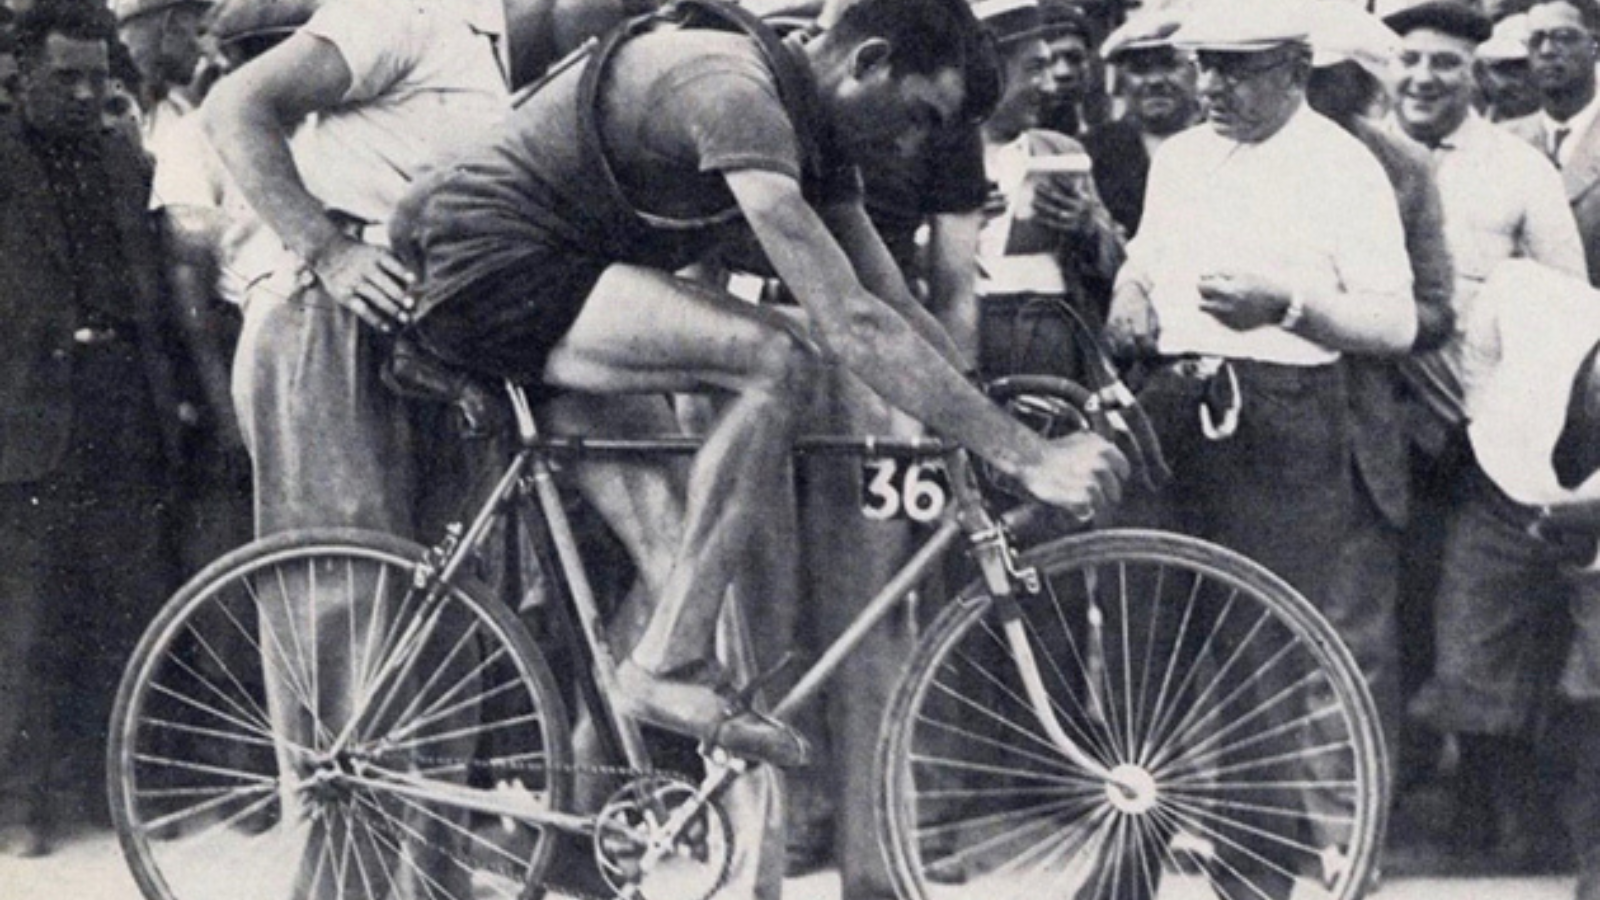 Antonin Magne at the start of the first individual time trial in 1934